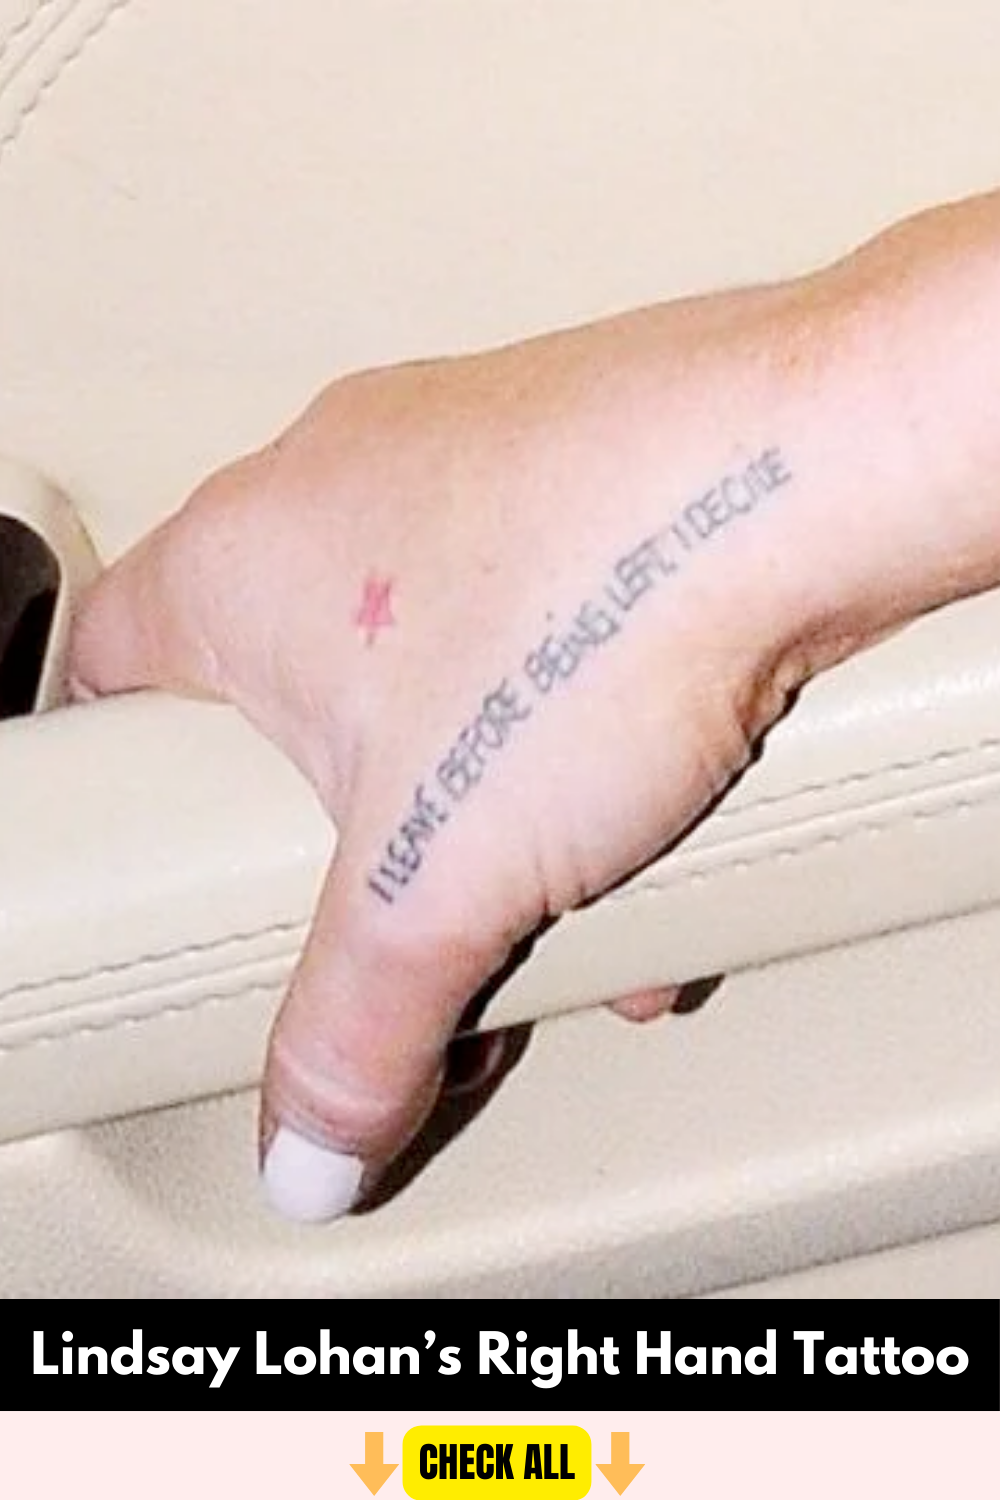 Lindsay Lohan star and quote tattoo on right hand